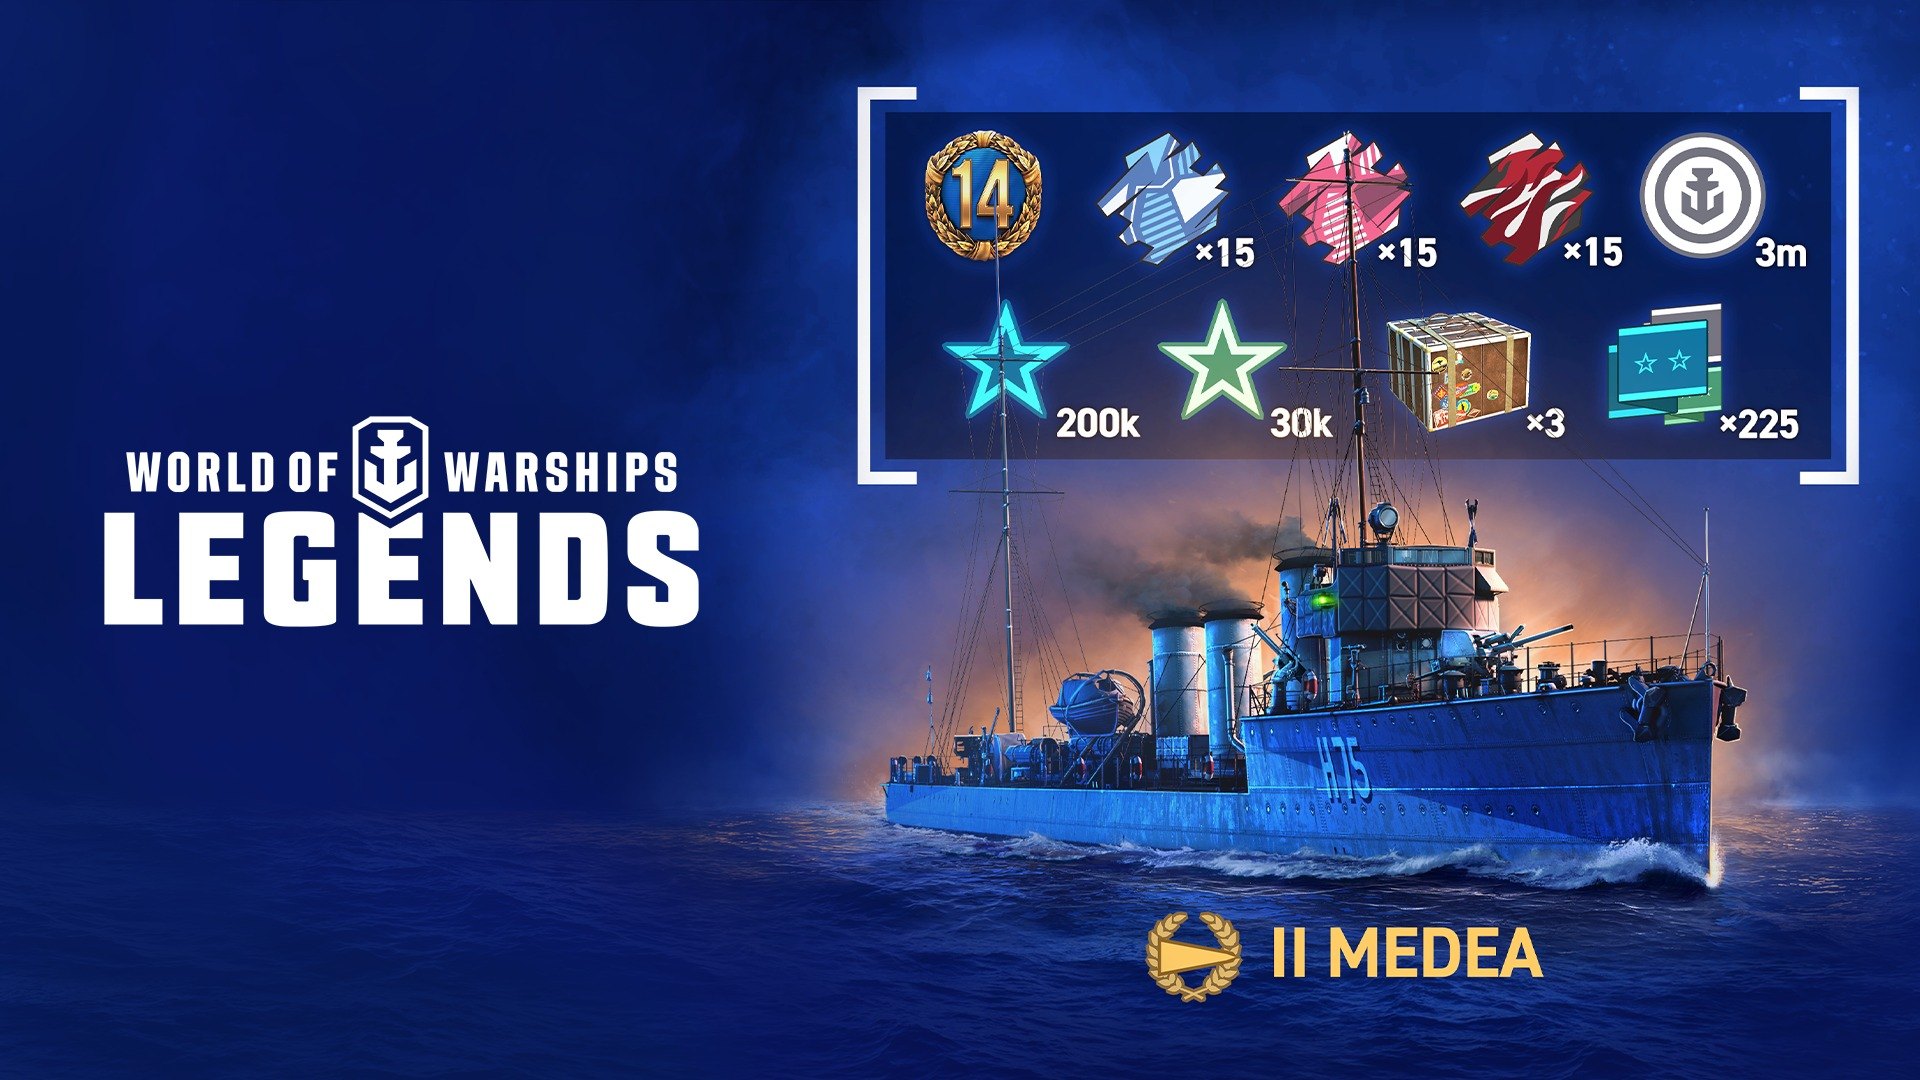 WoWs Legends Mobile - Is This Going to Work? 